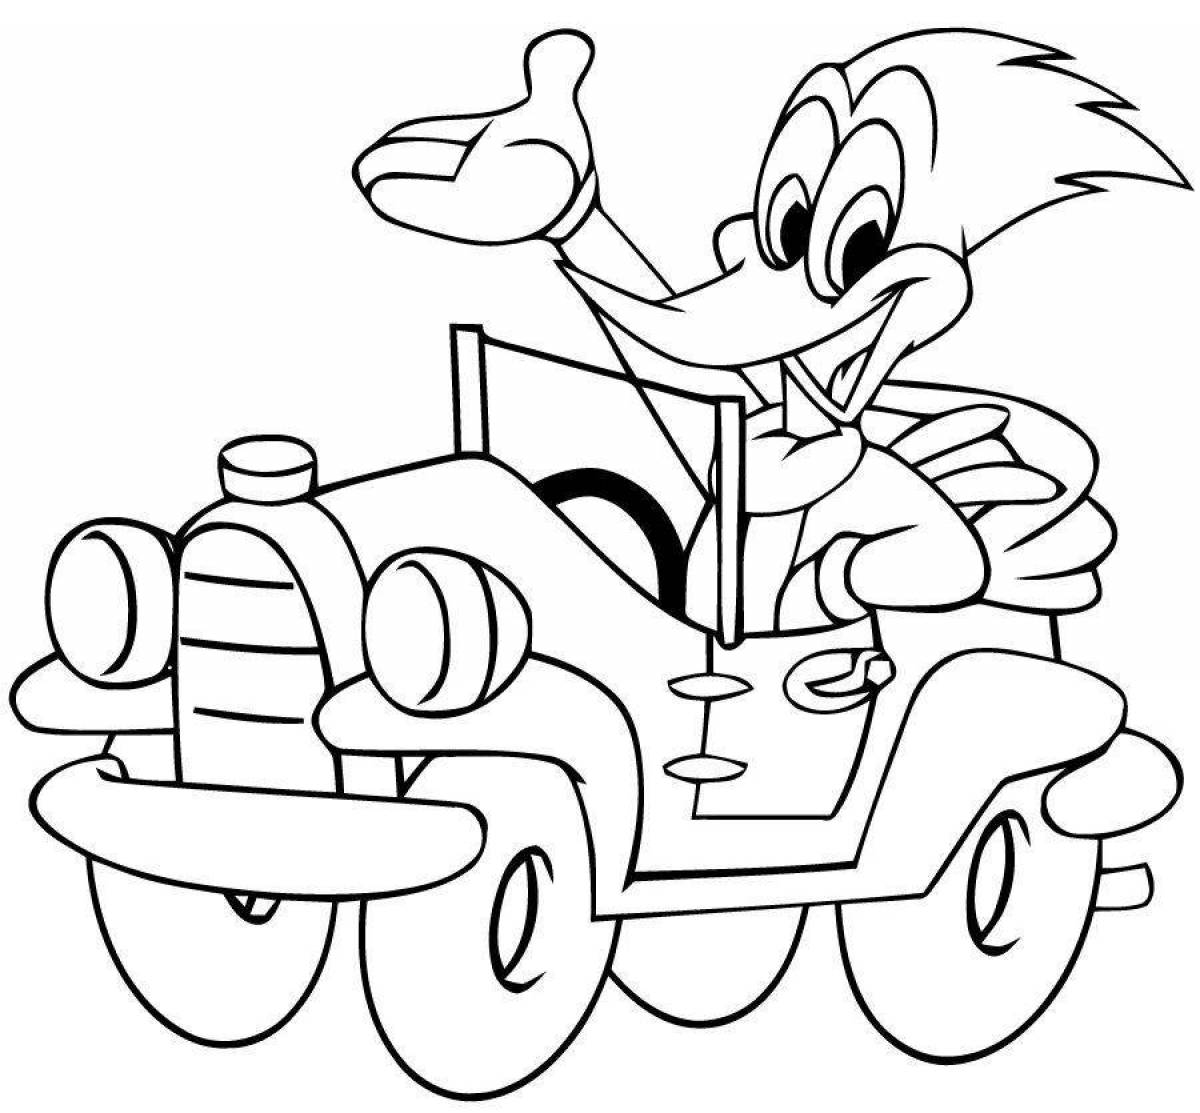 Adorable woody woodpecker coloring page